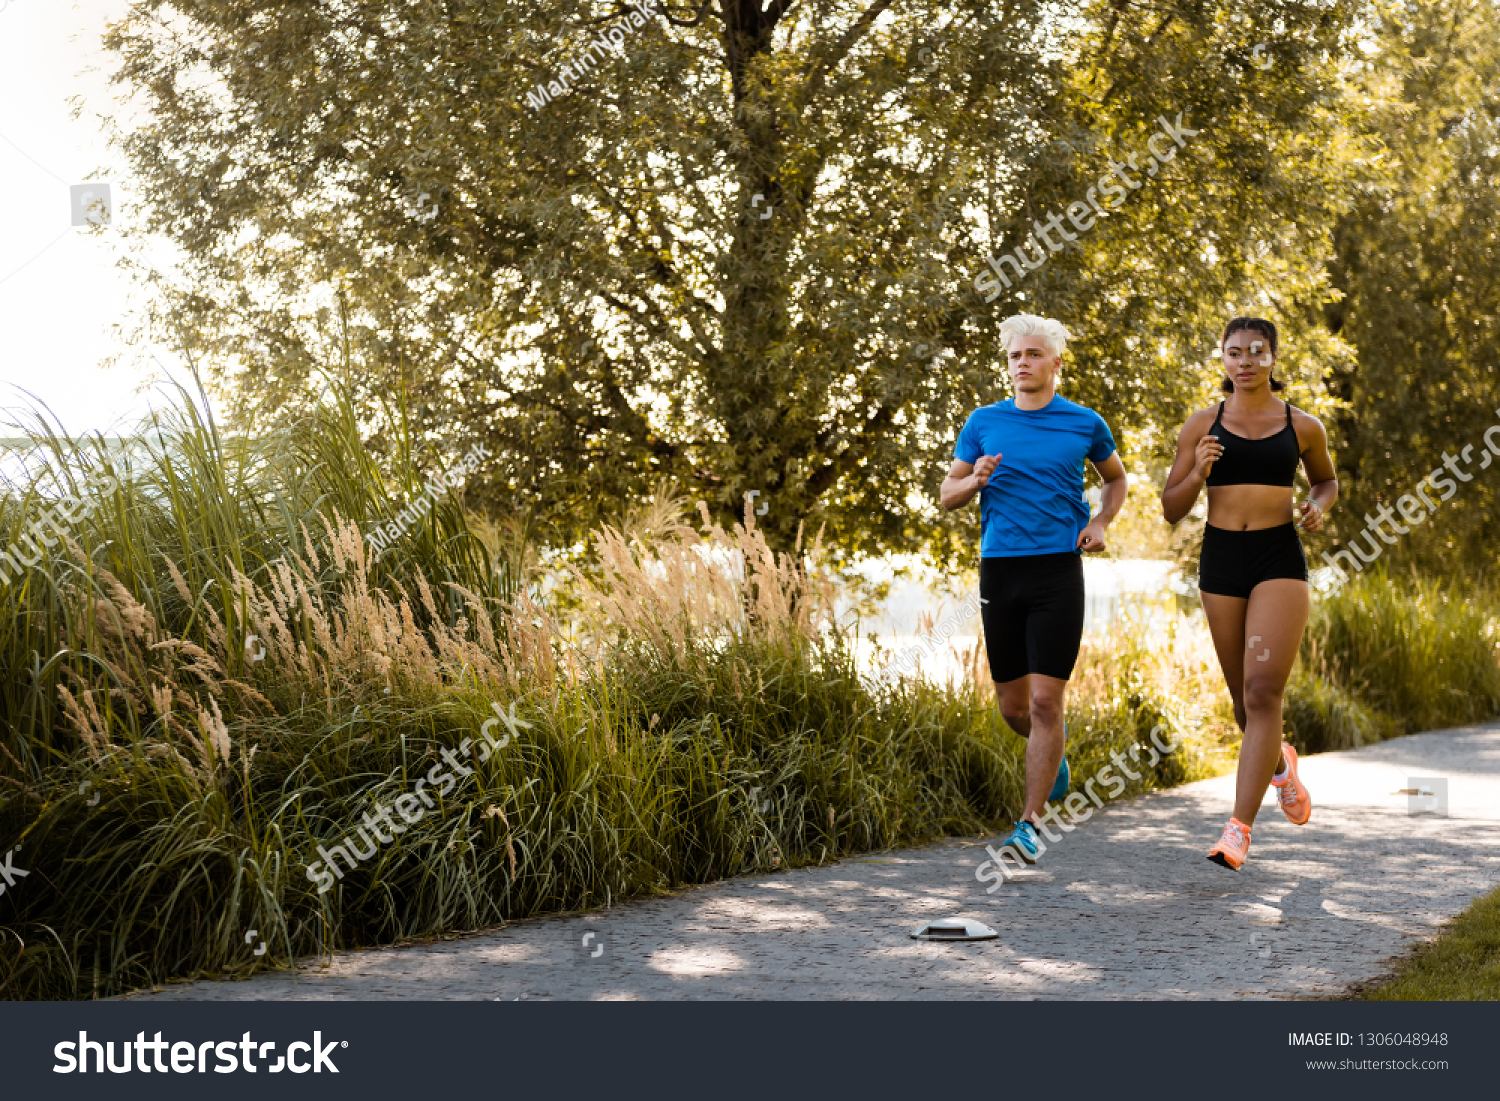 Multi-ethnic joggers exercising together outside in park #1306048948